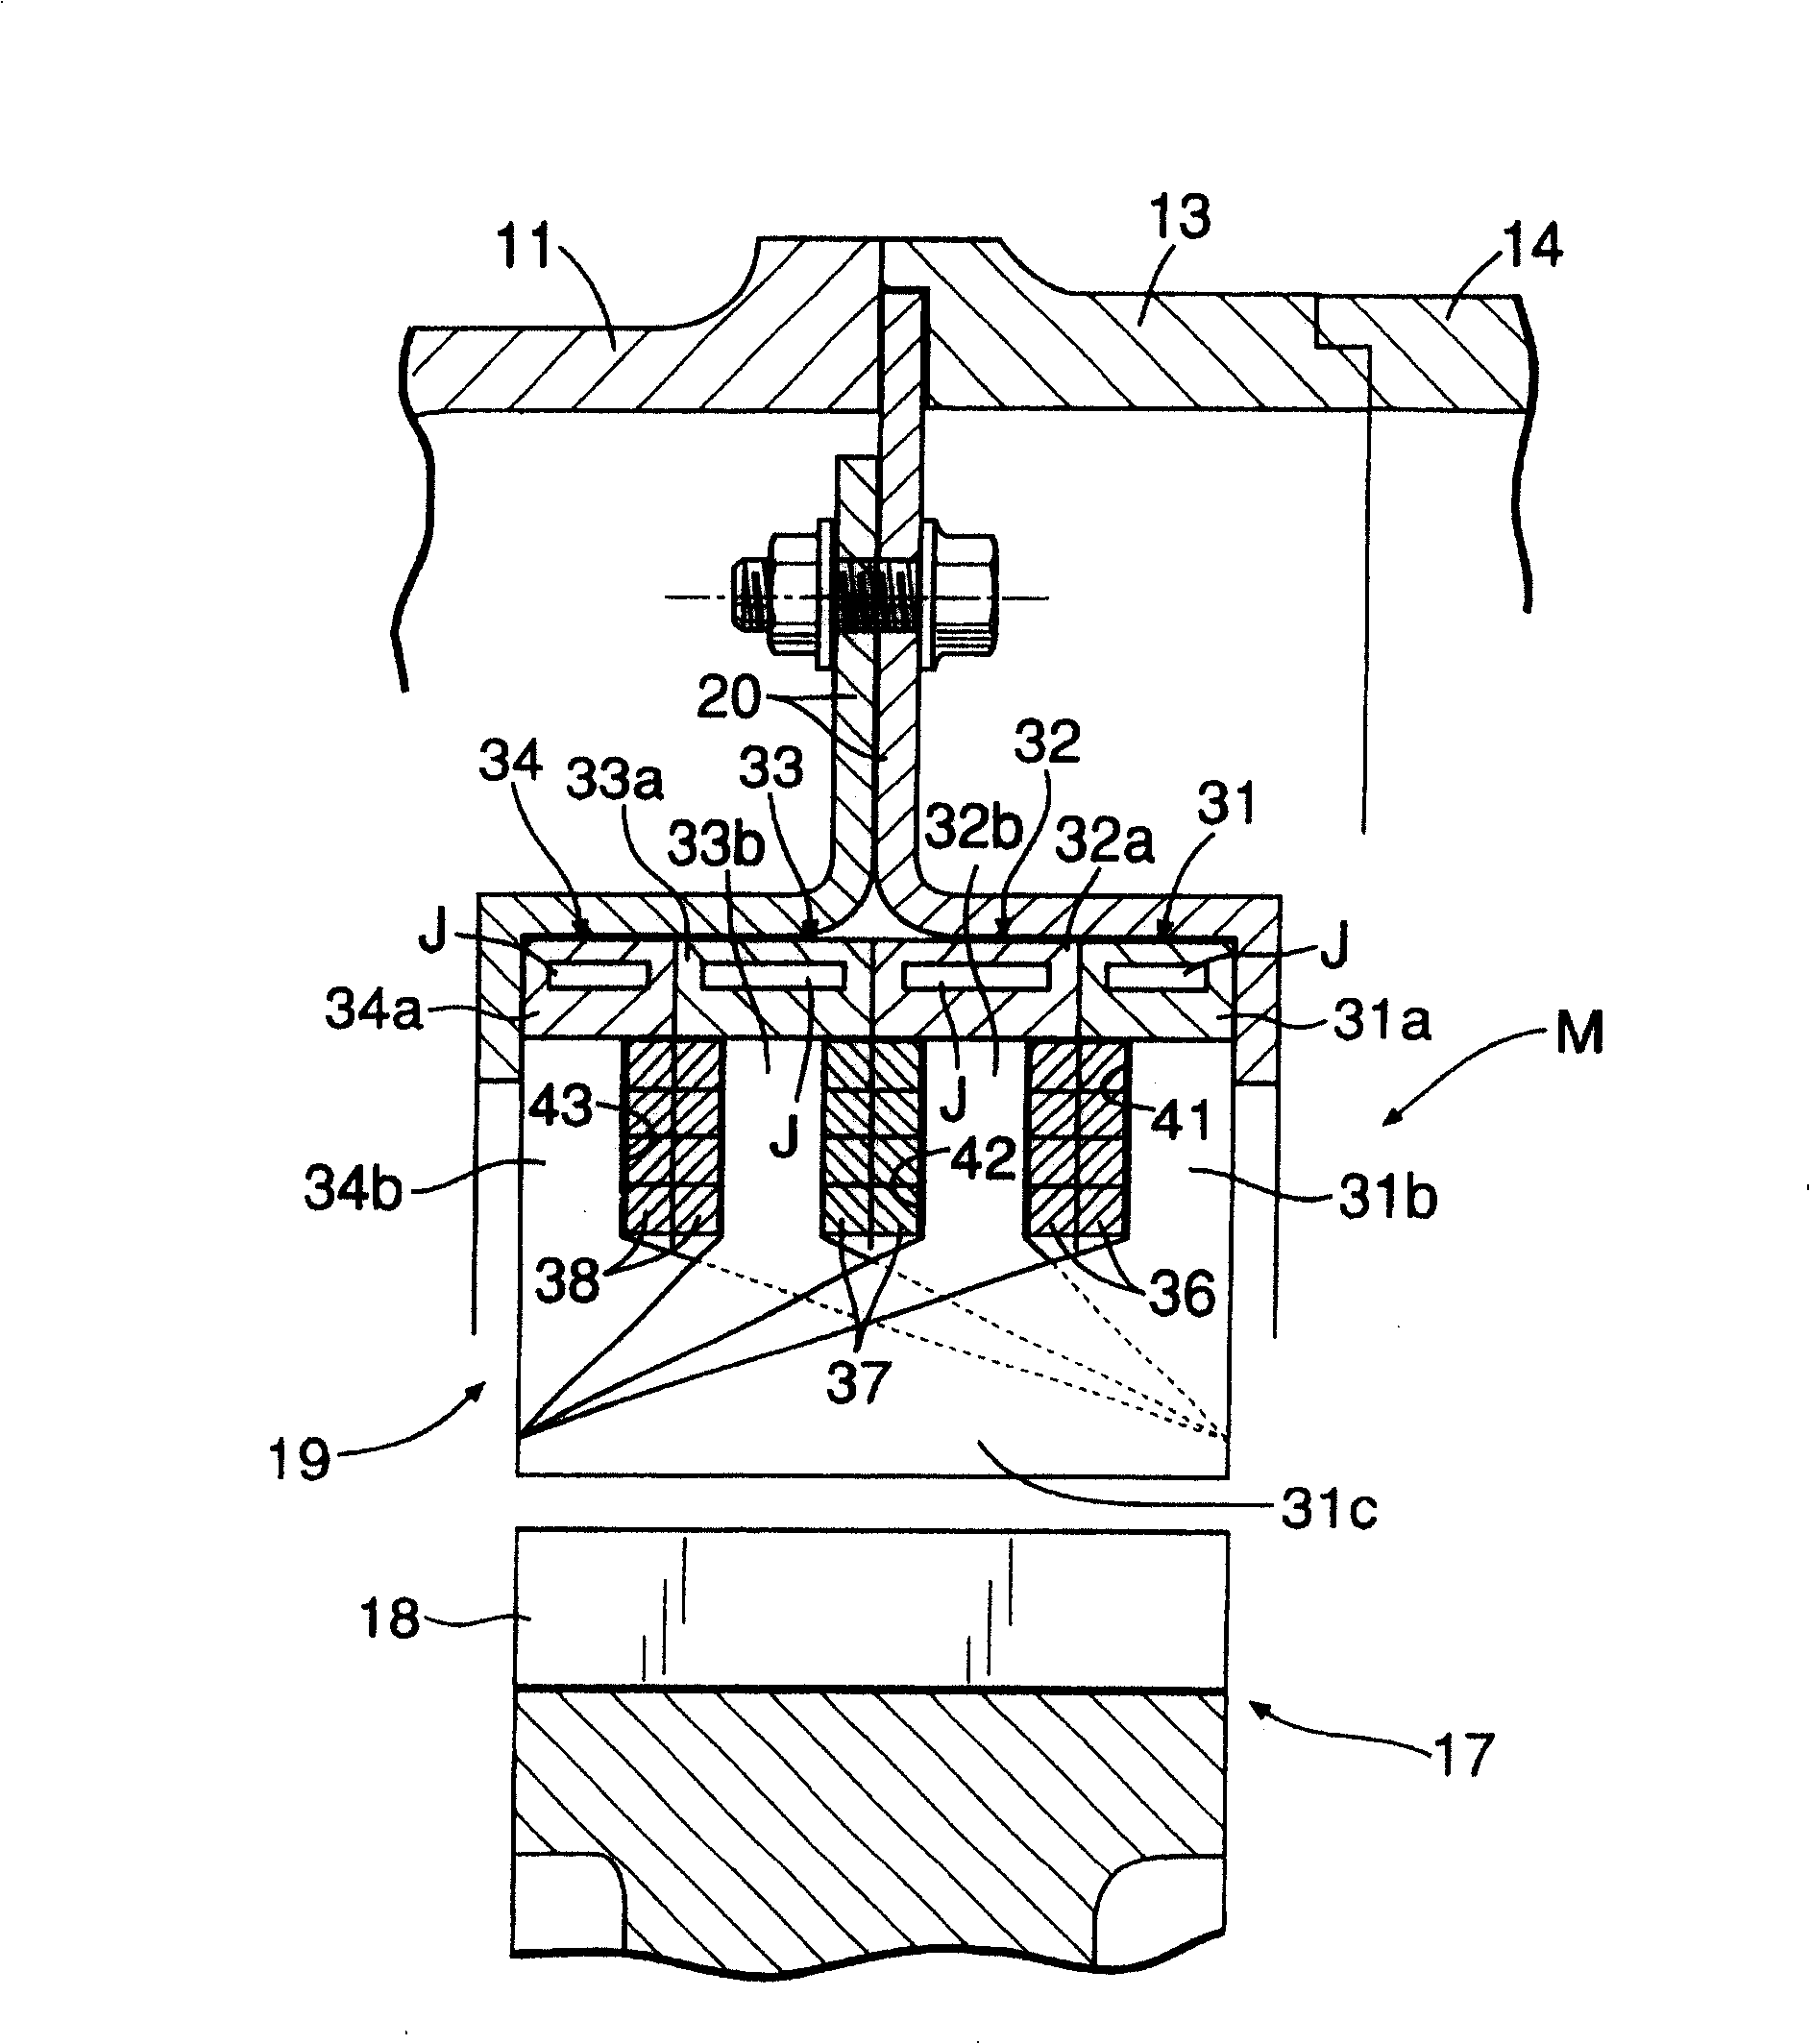 Stator of claw-pole shaped motor